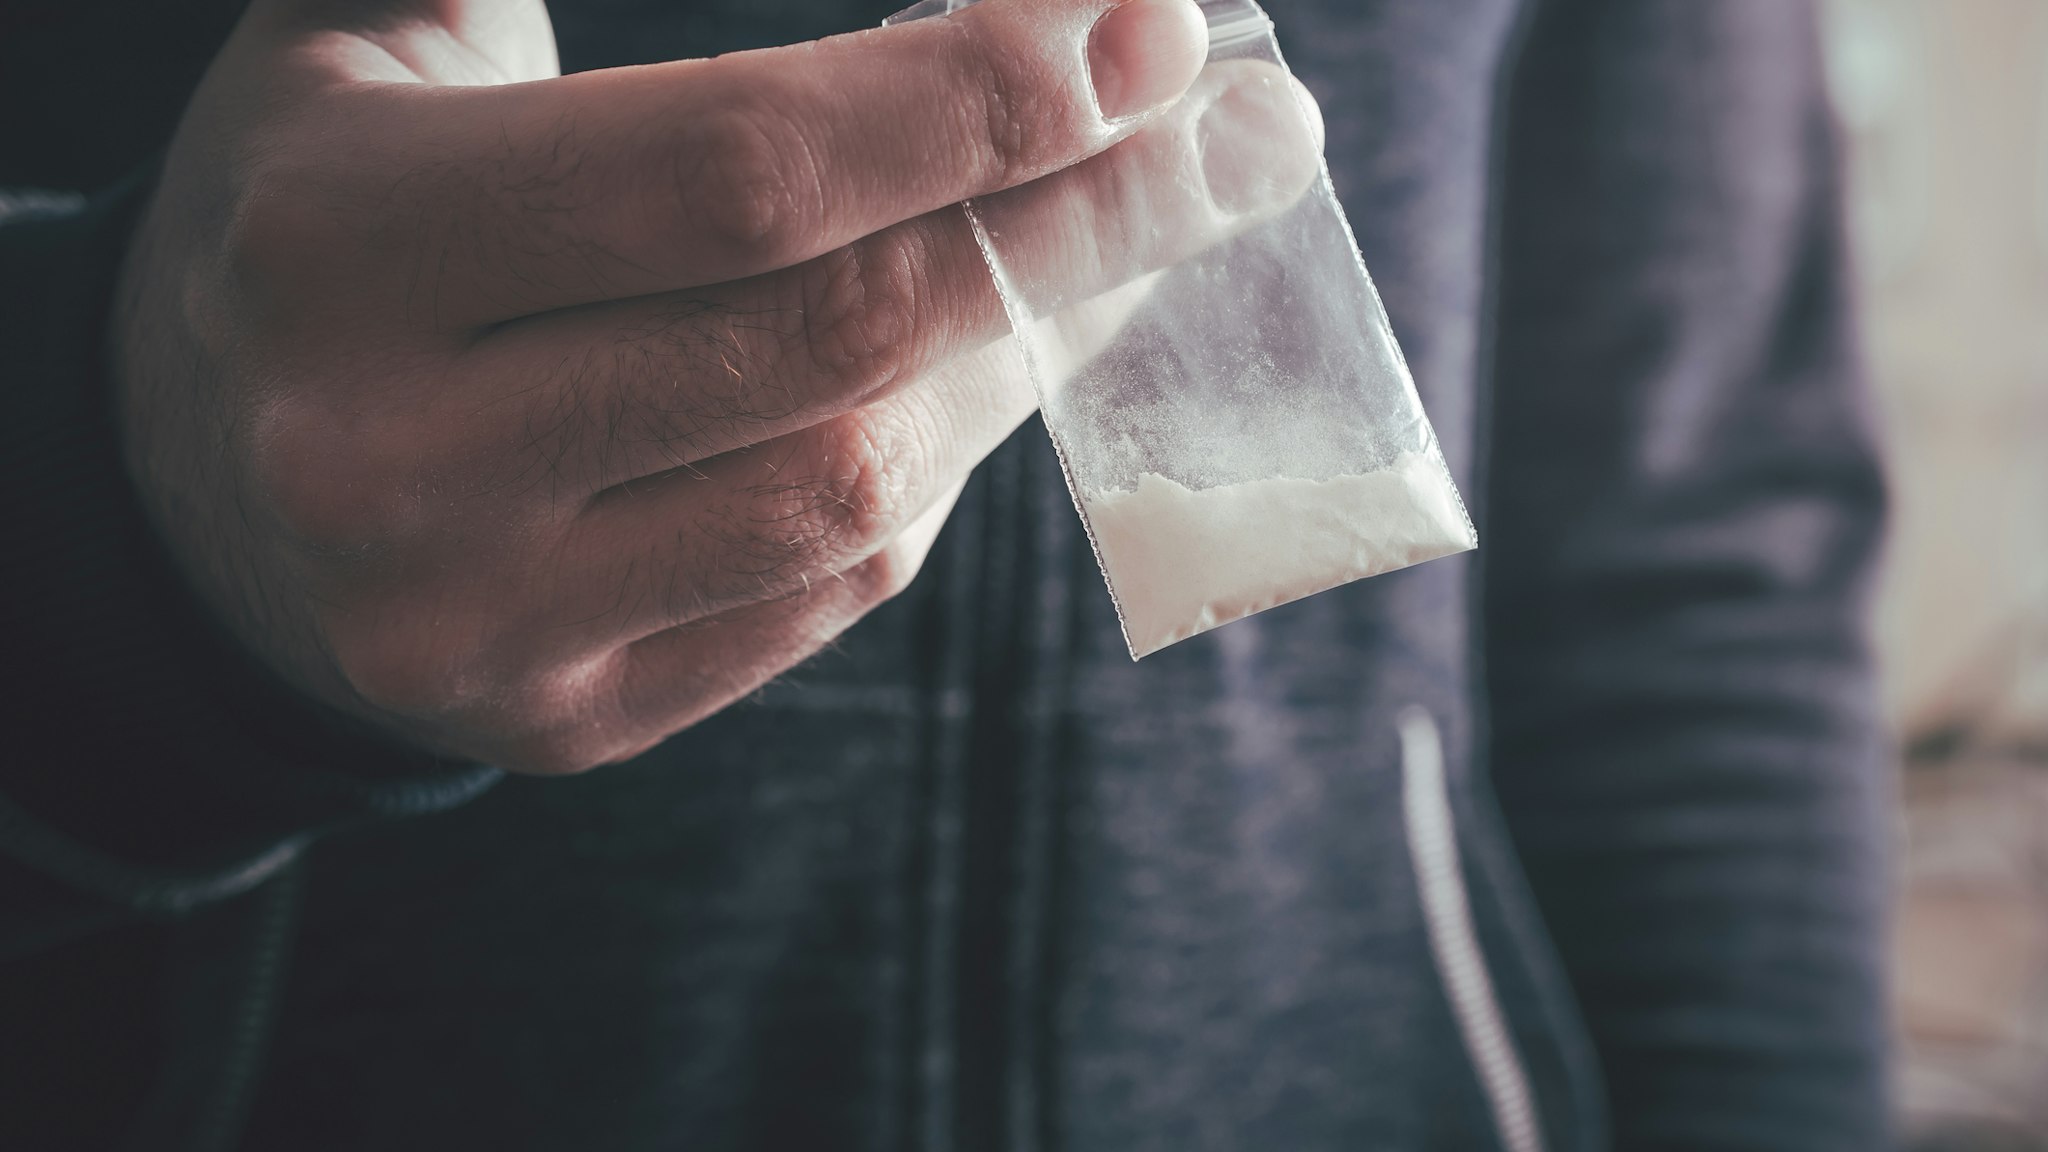 Midsection Of Man Holding Cocaine - stock photo